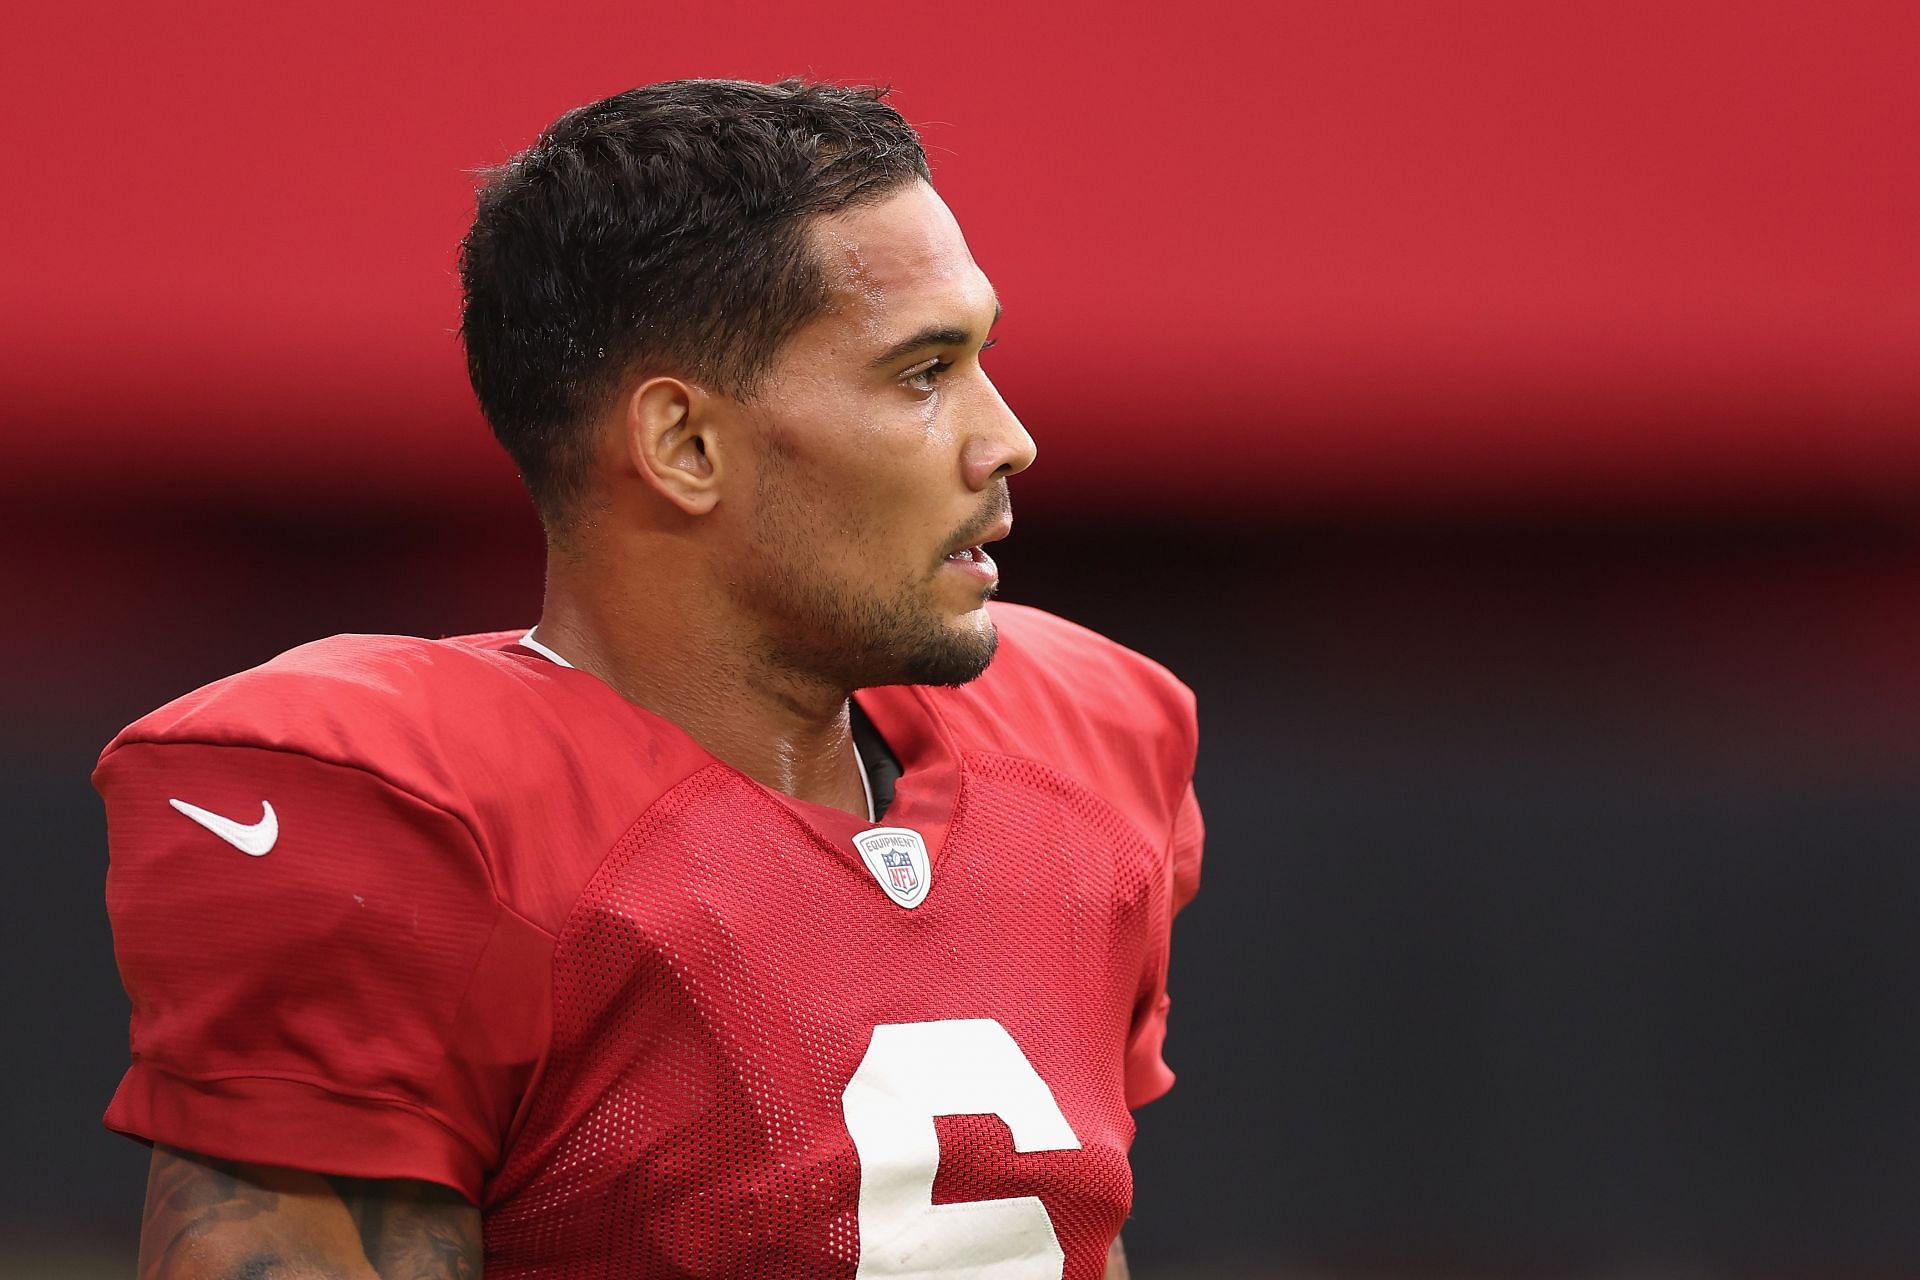 Cardinals' James Conner Placed on IR with Knee Injury; Out at